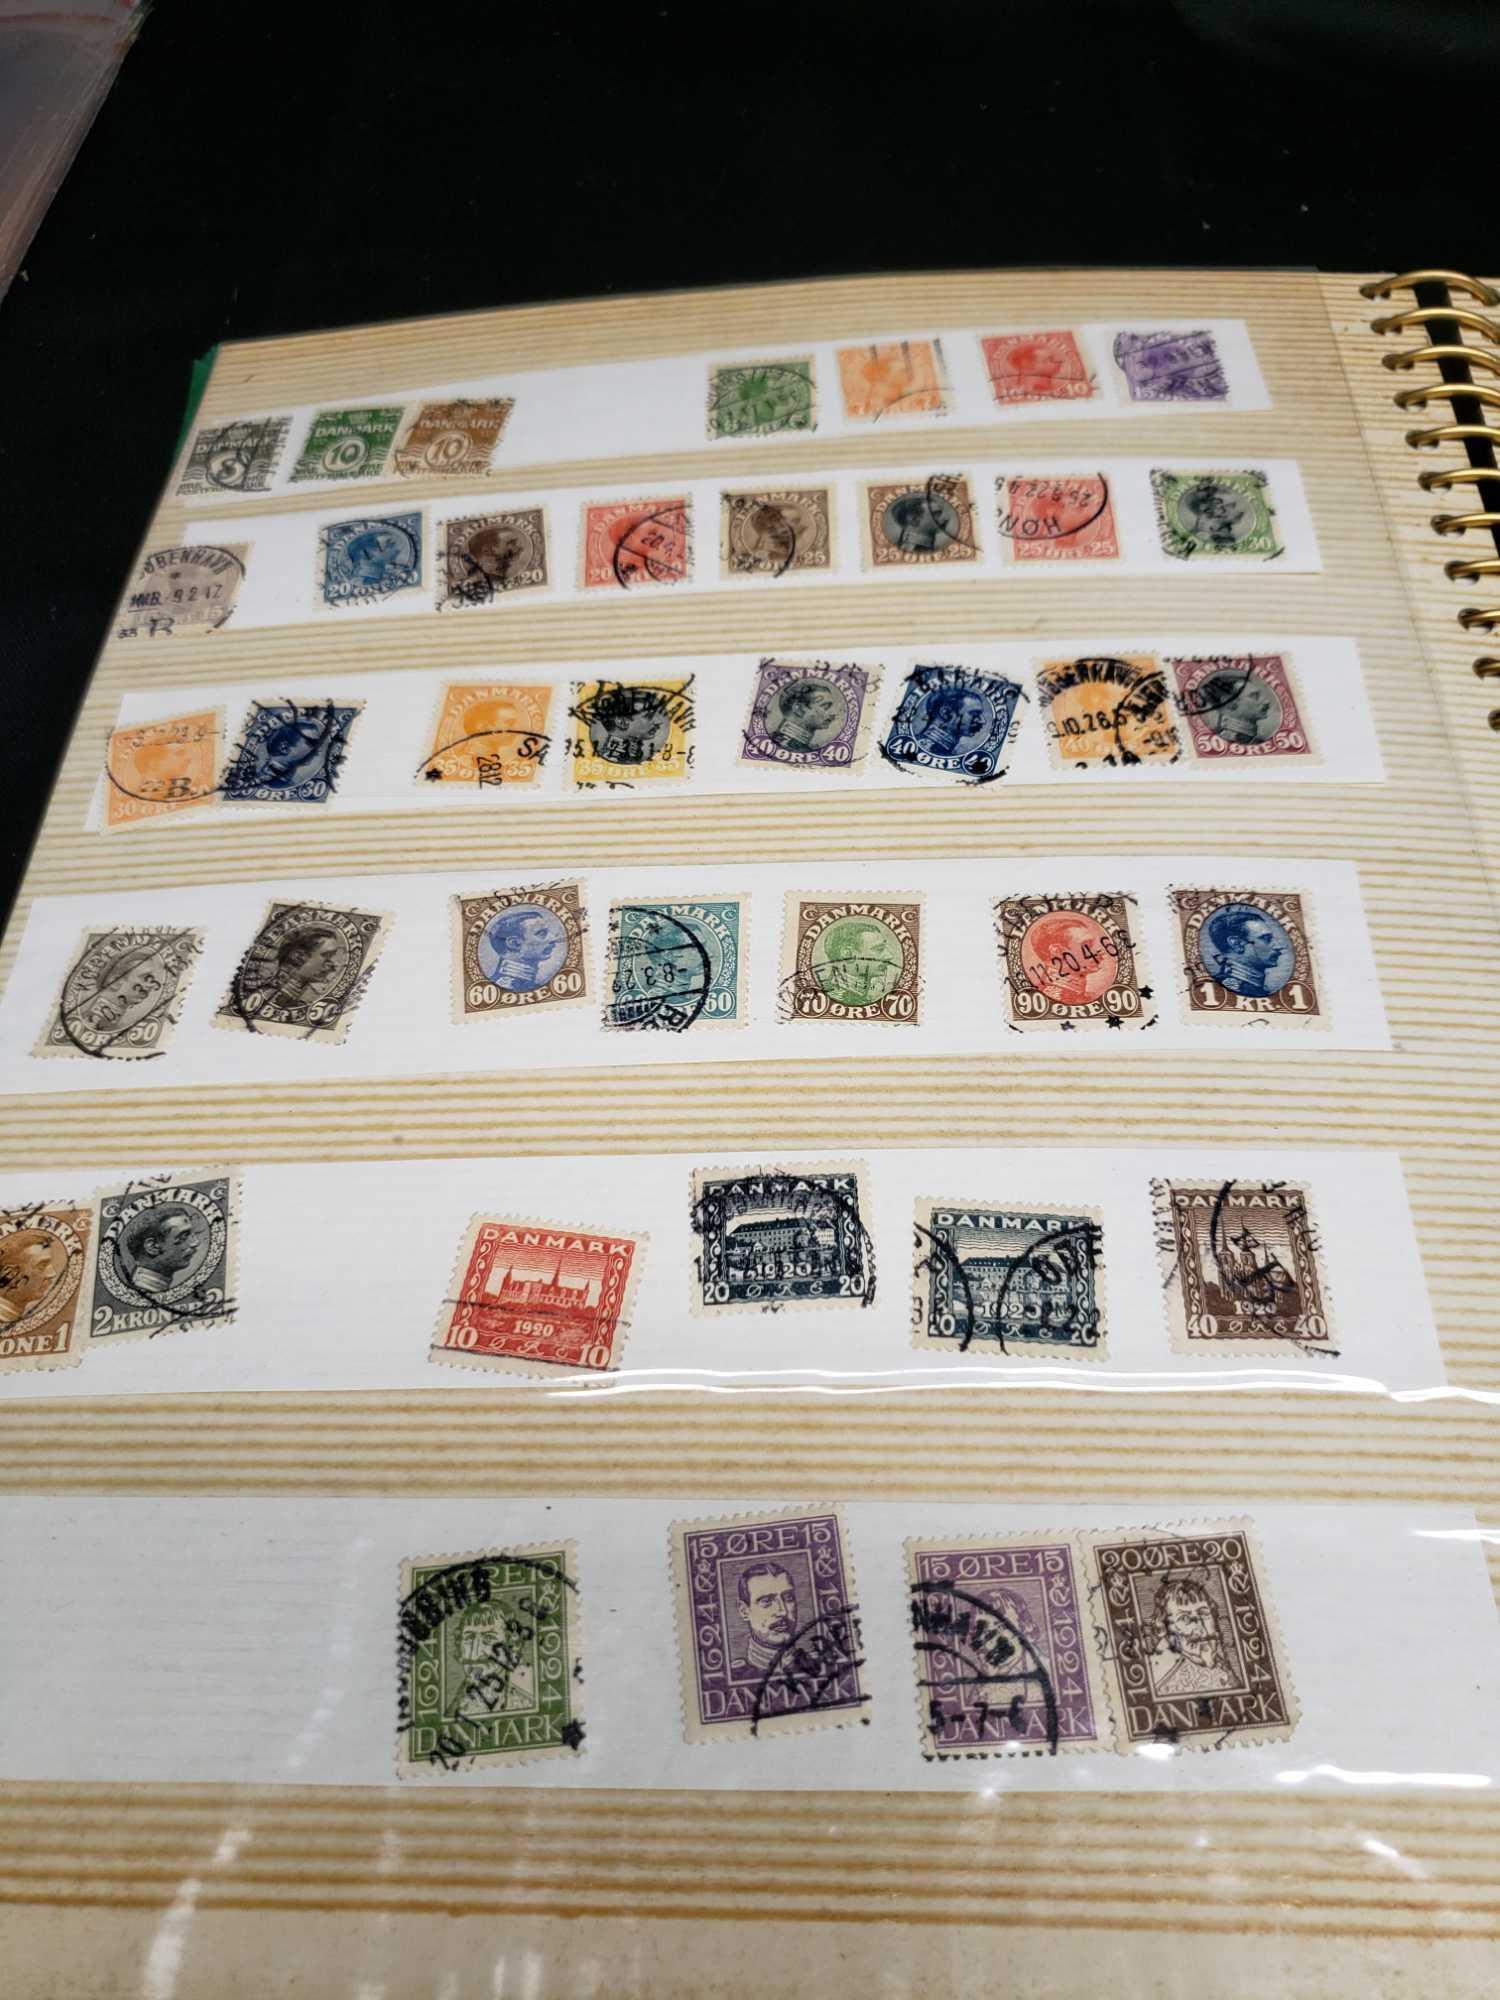 Rare Stamps of Republic Dominicana. Egypte. Ethiopie and more